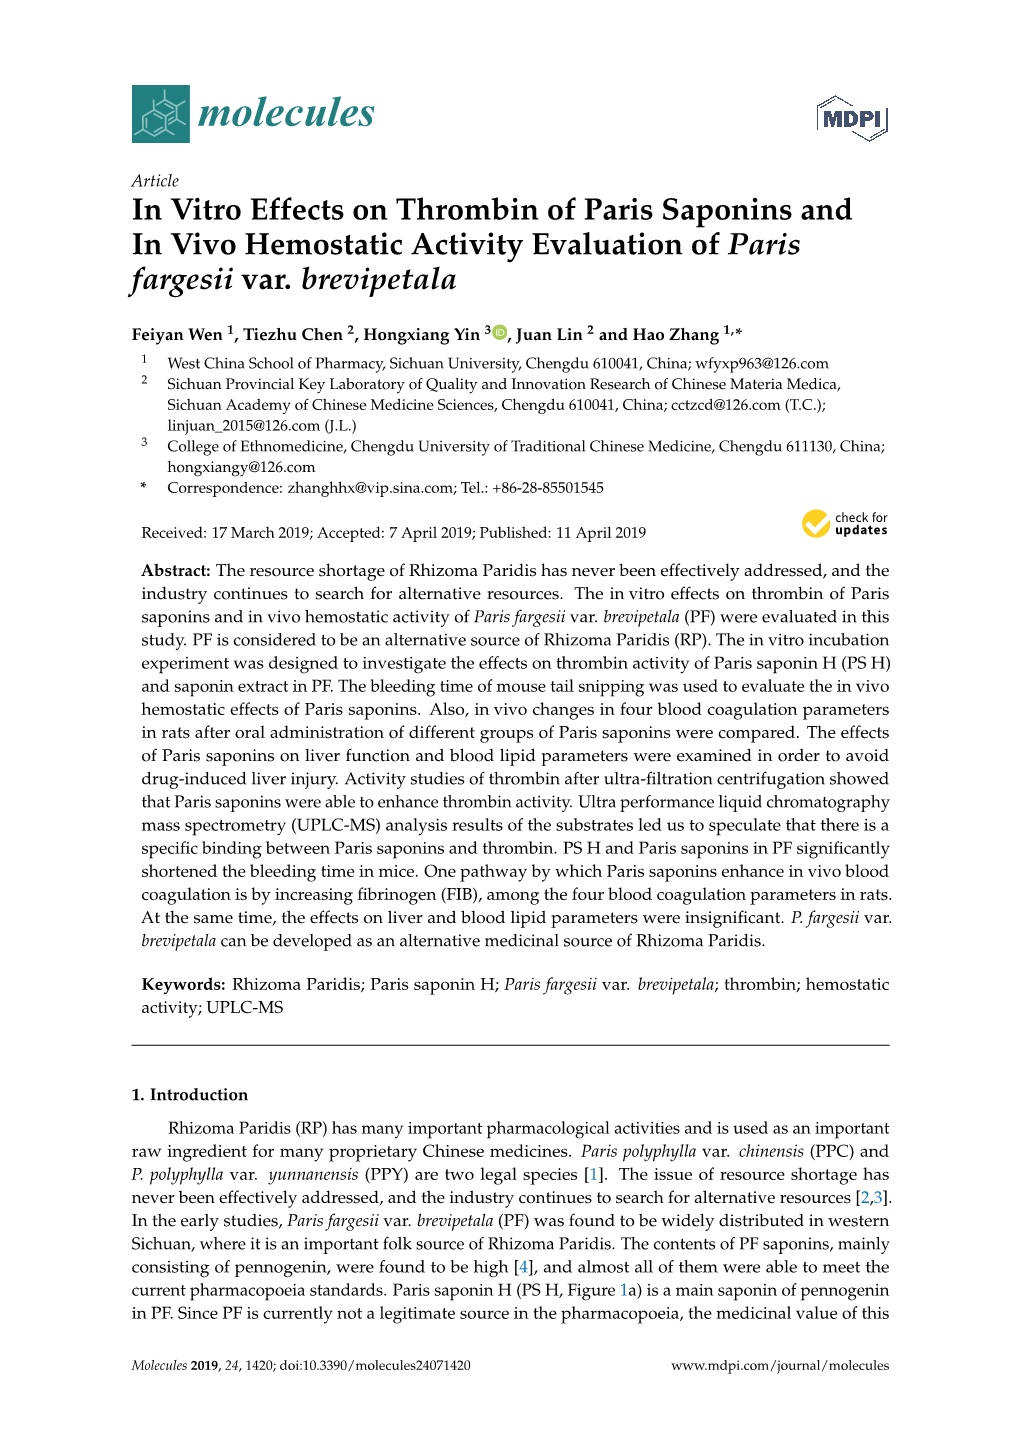 In Vitro Effects on Thrombin of Paris Saponins and in Vivo Hemostatic Activity Evaluation of Paris Fargesii Var